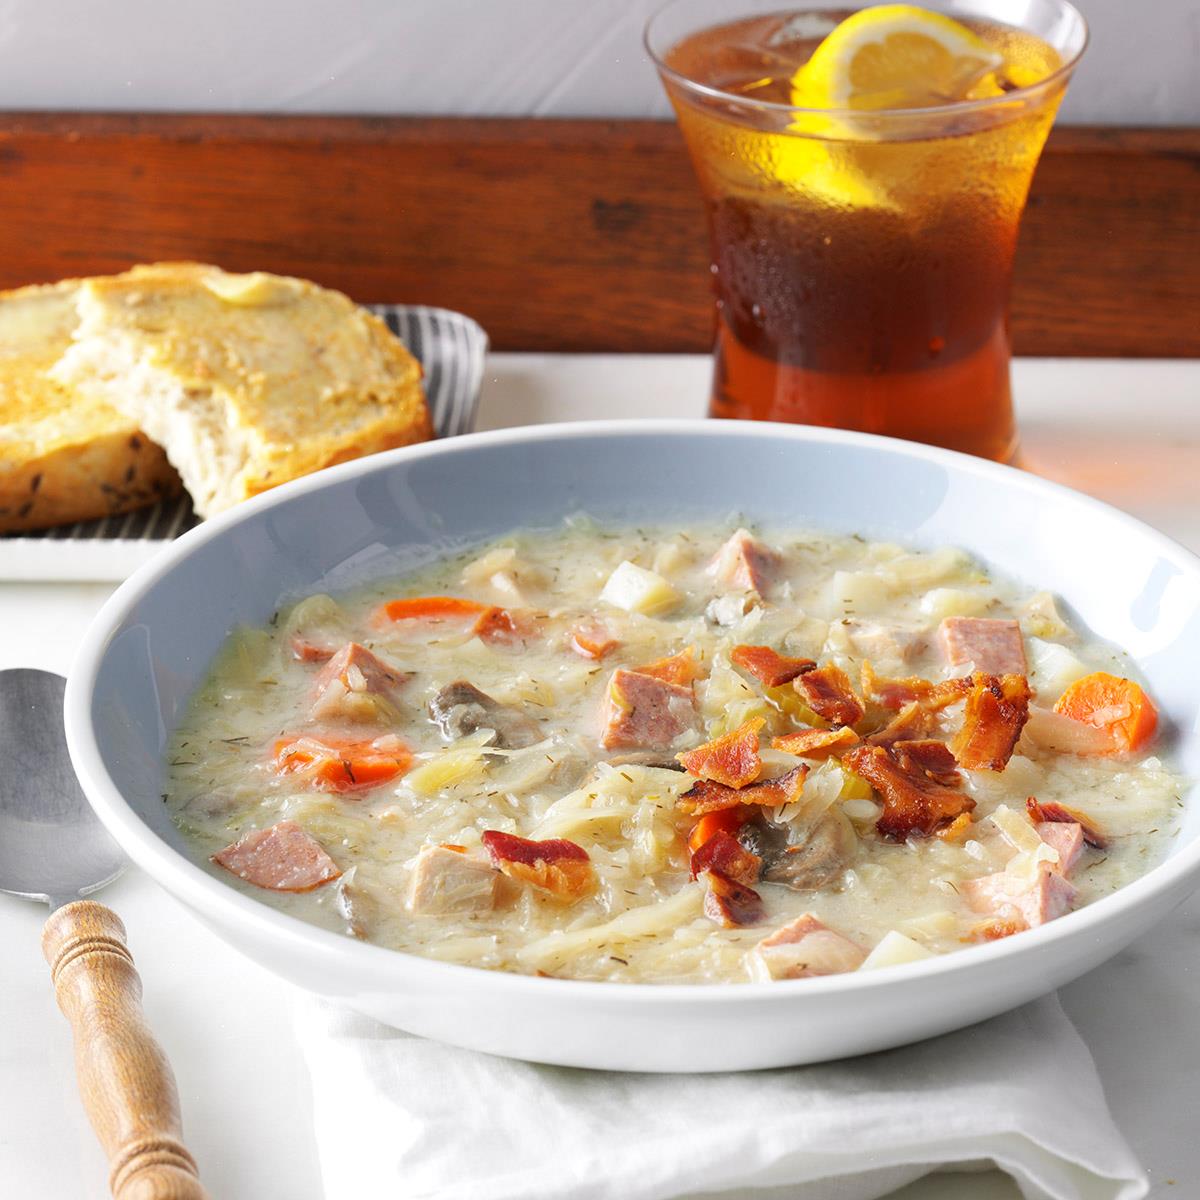 Slow-Cooked Sauerkraut Soup Recipe: How to Make It